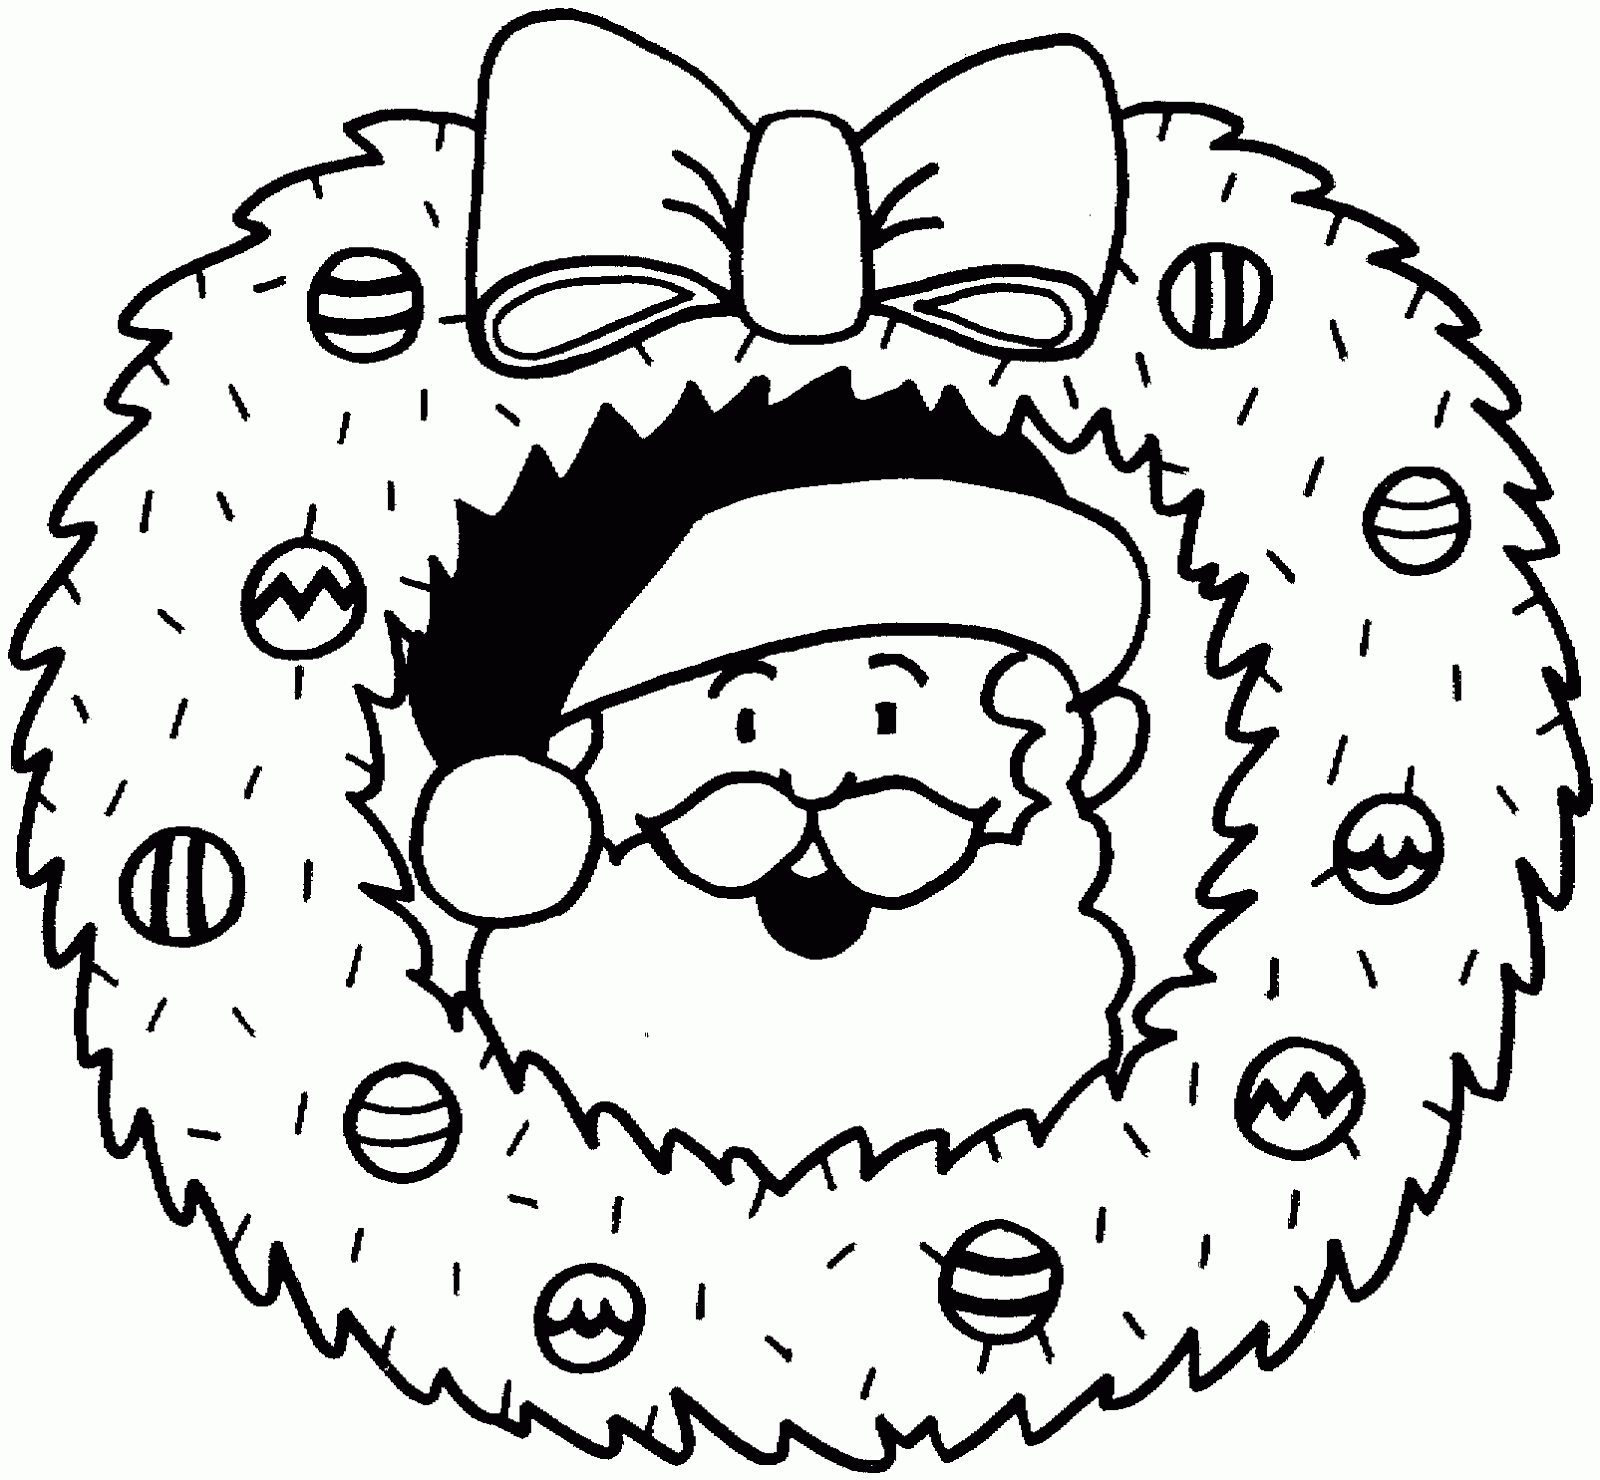 Coloring Pages Wreaths Coloring Pages Free and Printable